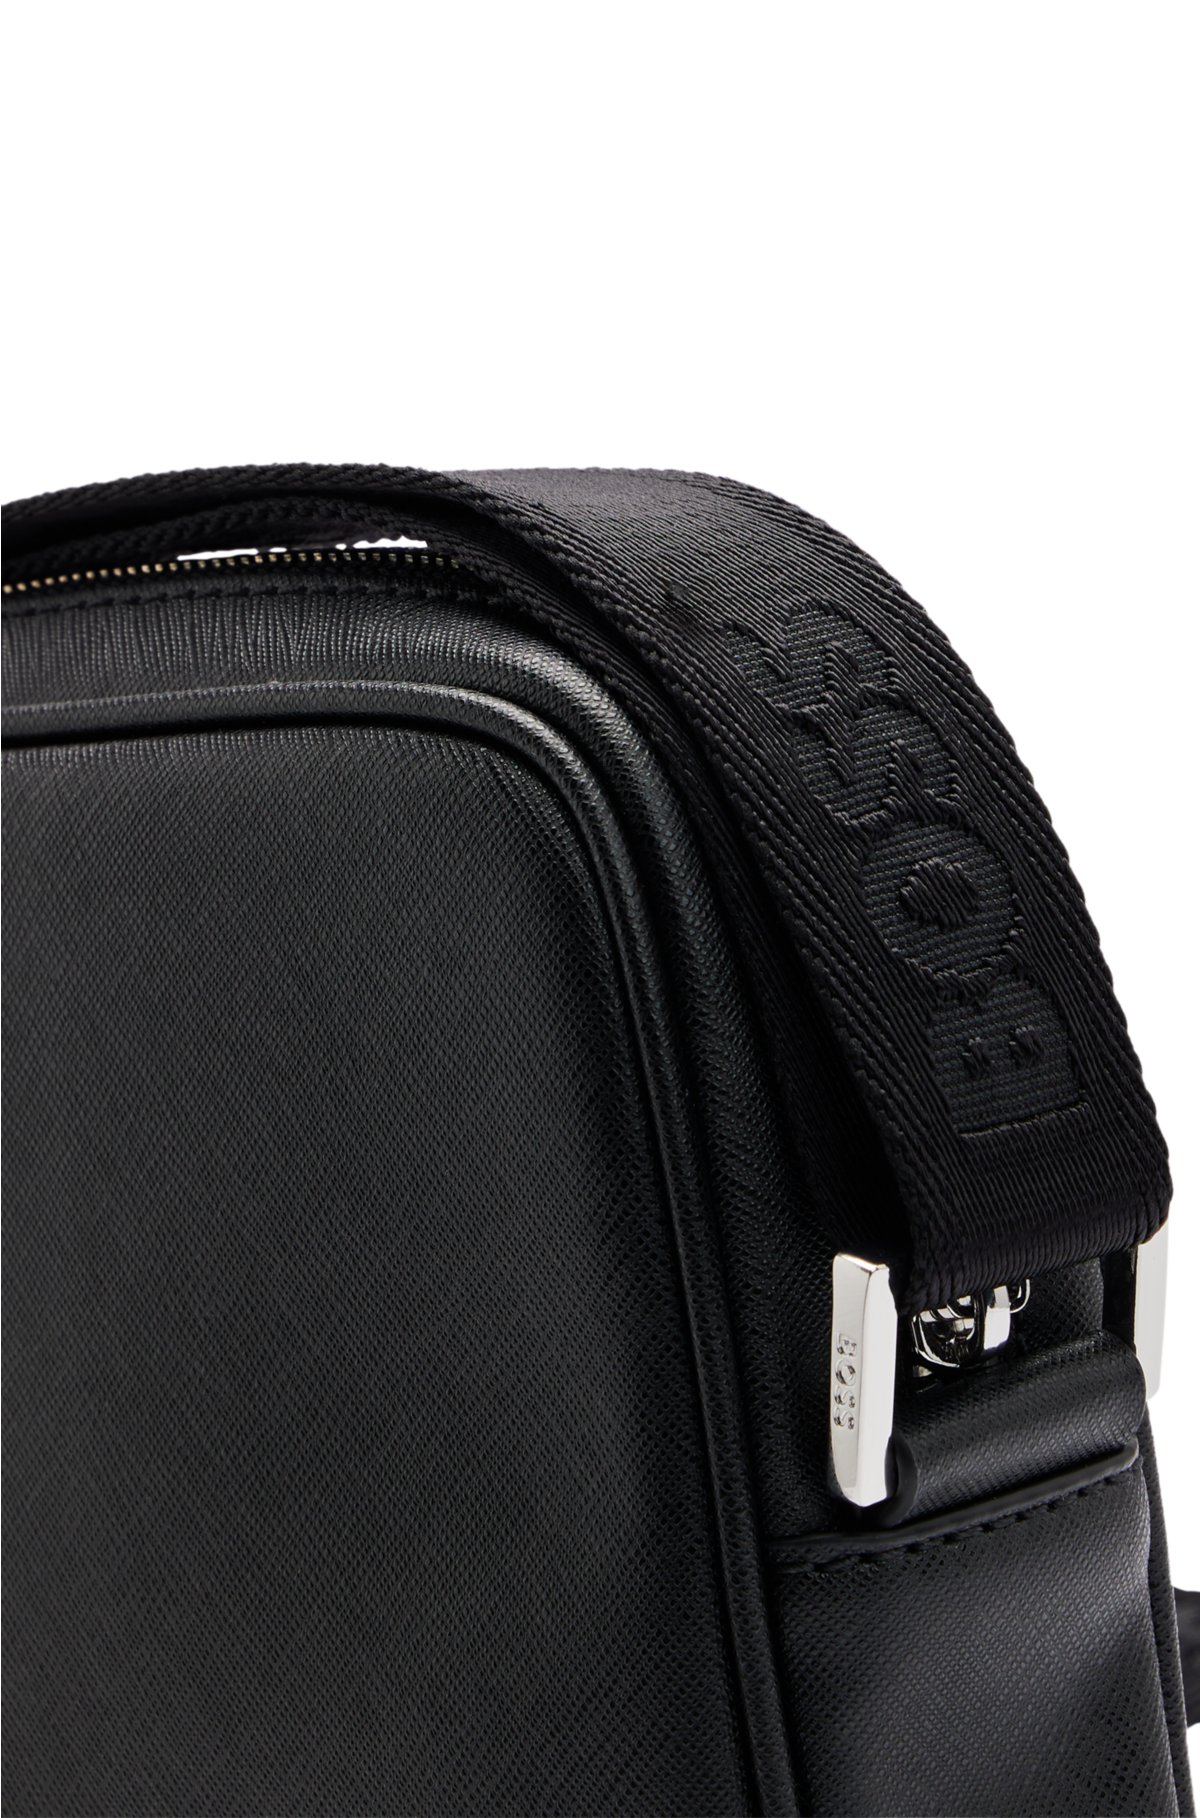 bag detail - signature BOSS logo stripe and with Reporter